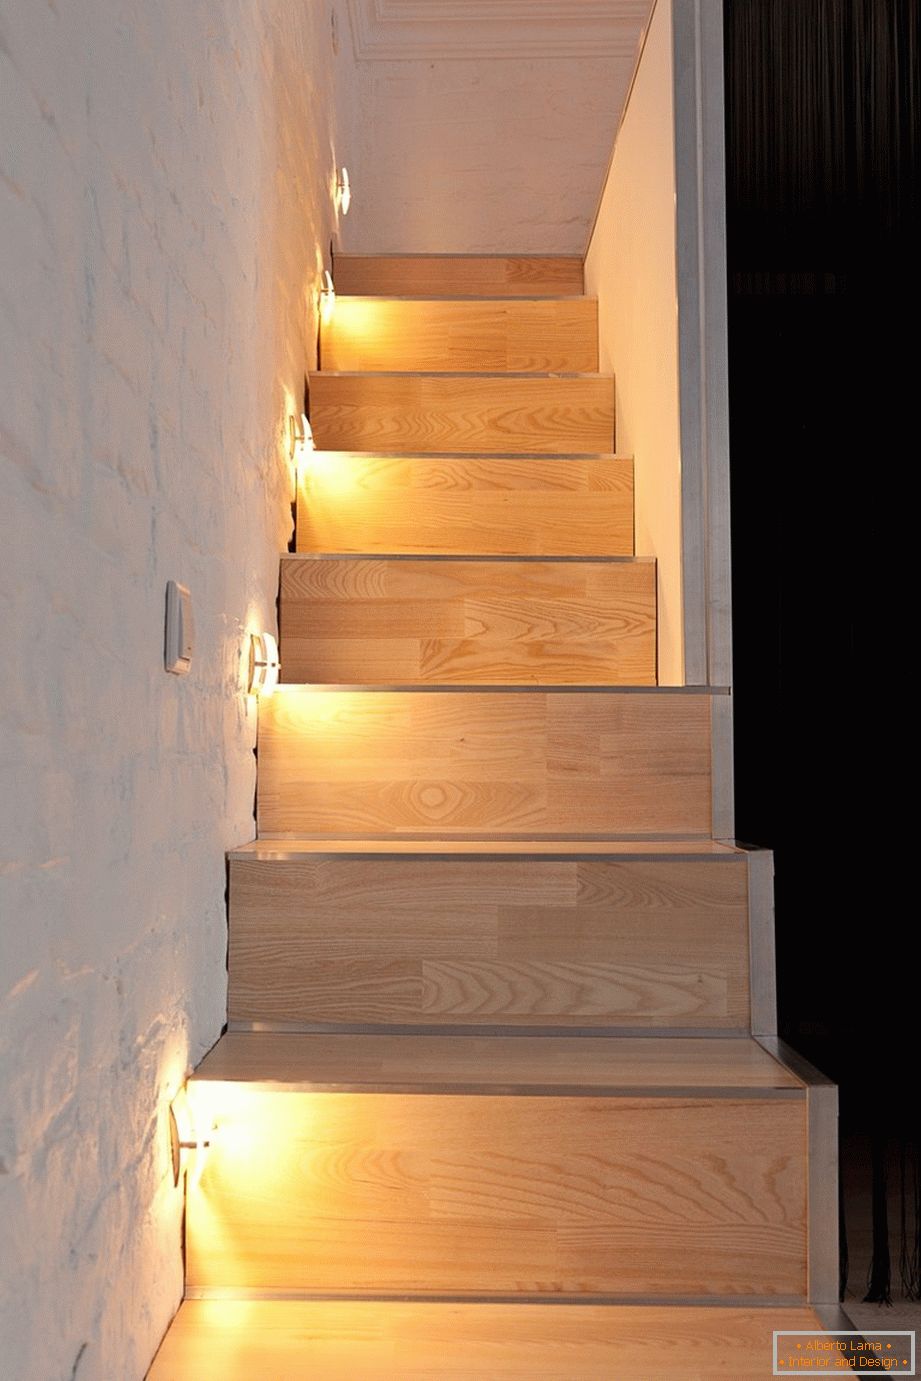 Stairs made of wood